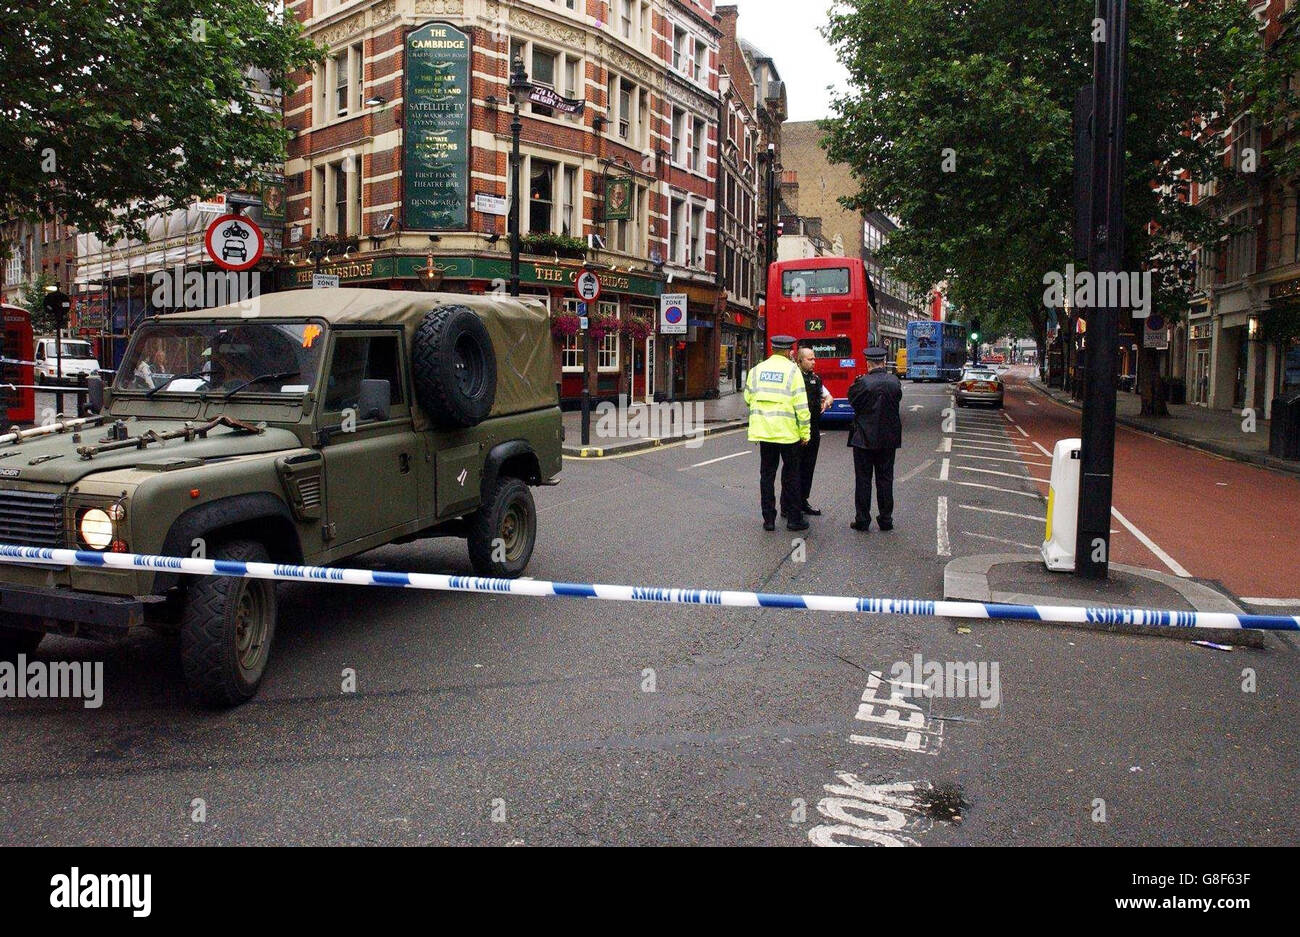 An Army Land Rover is parked inside a police cordon at Cambridge Circus, during a security alert in London after a bomb ripped through a double decker bus. Explosions today ripped through central London, with scores feared dead and the city plunged into chaos. Stock Photo